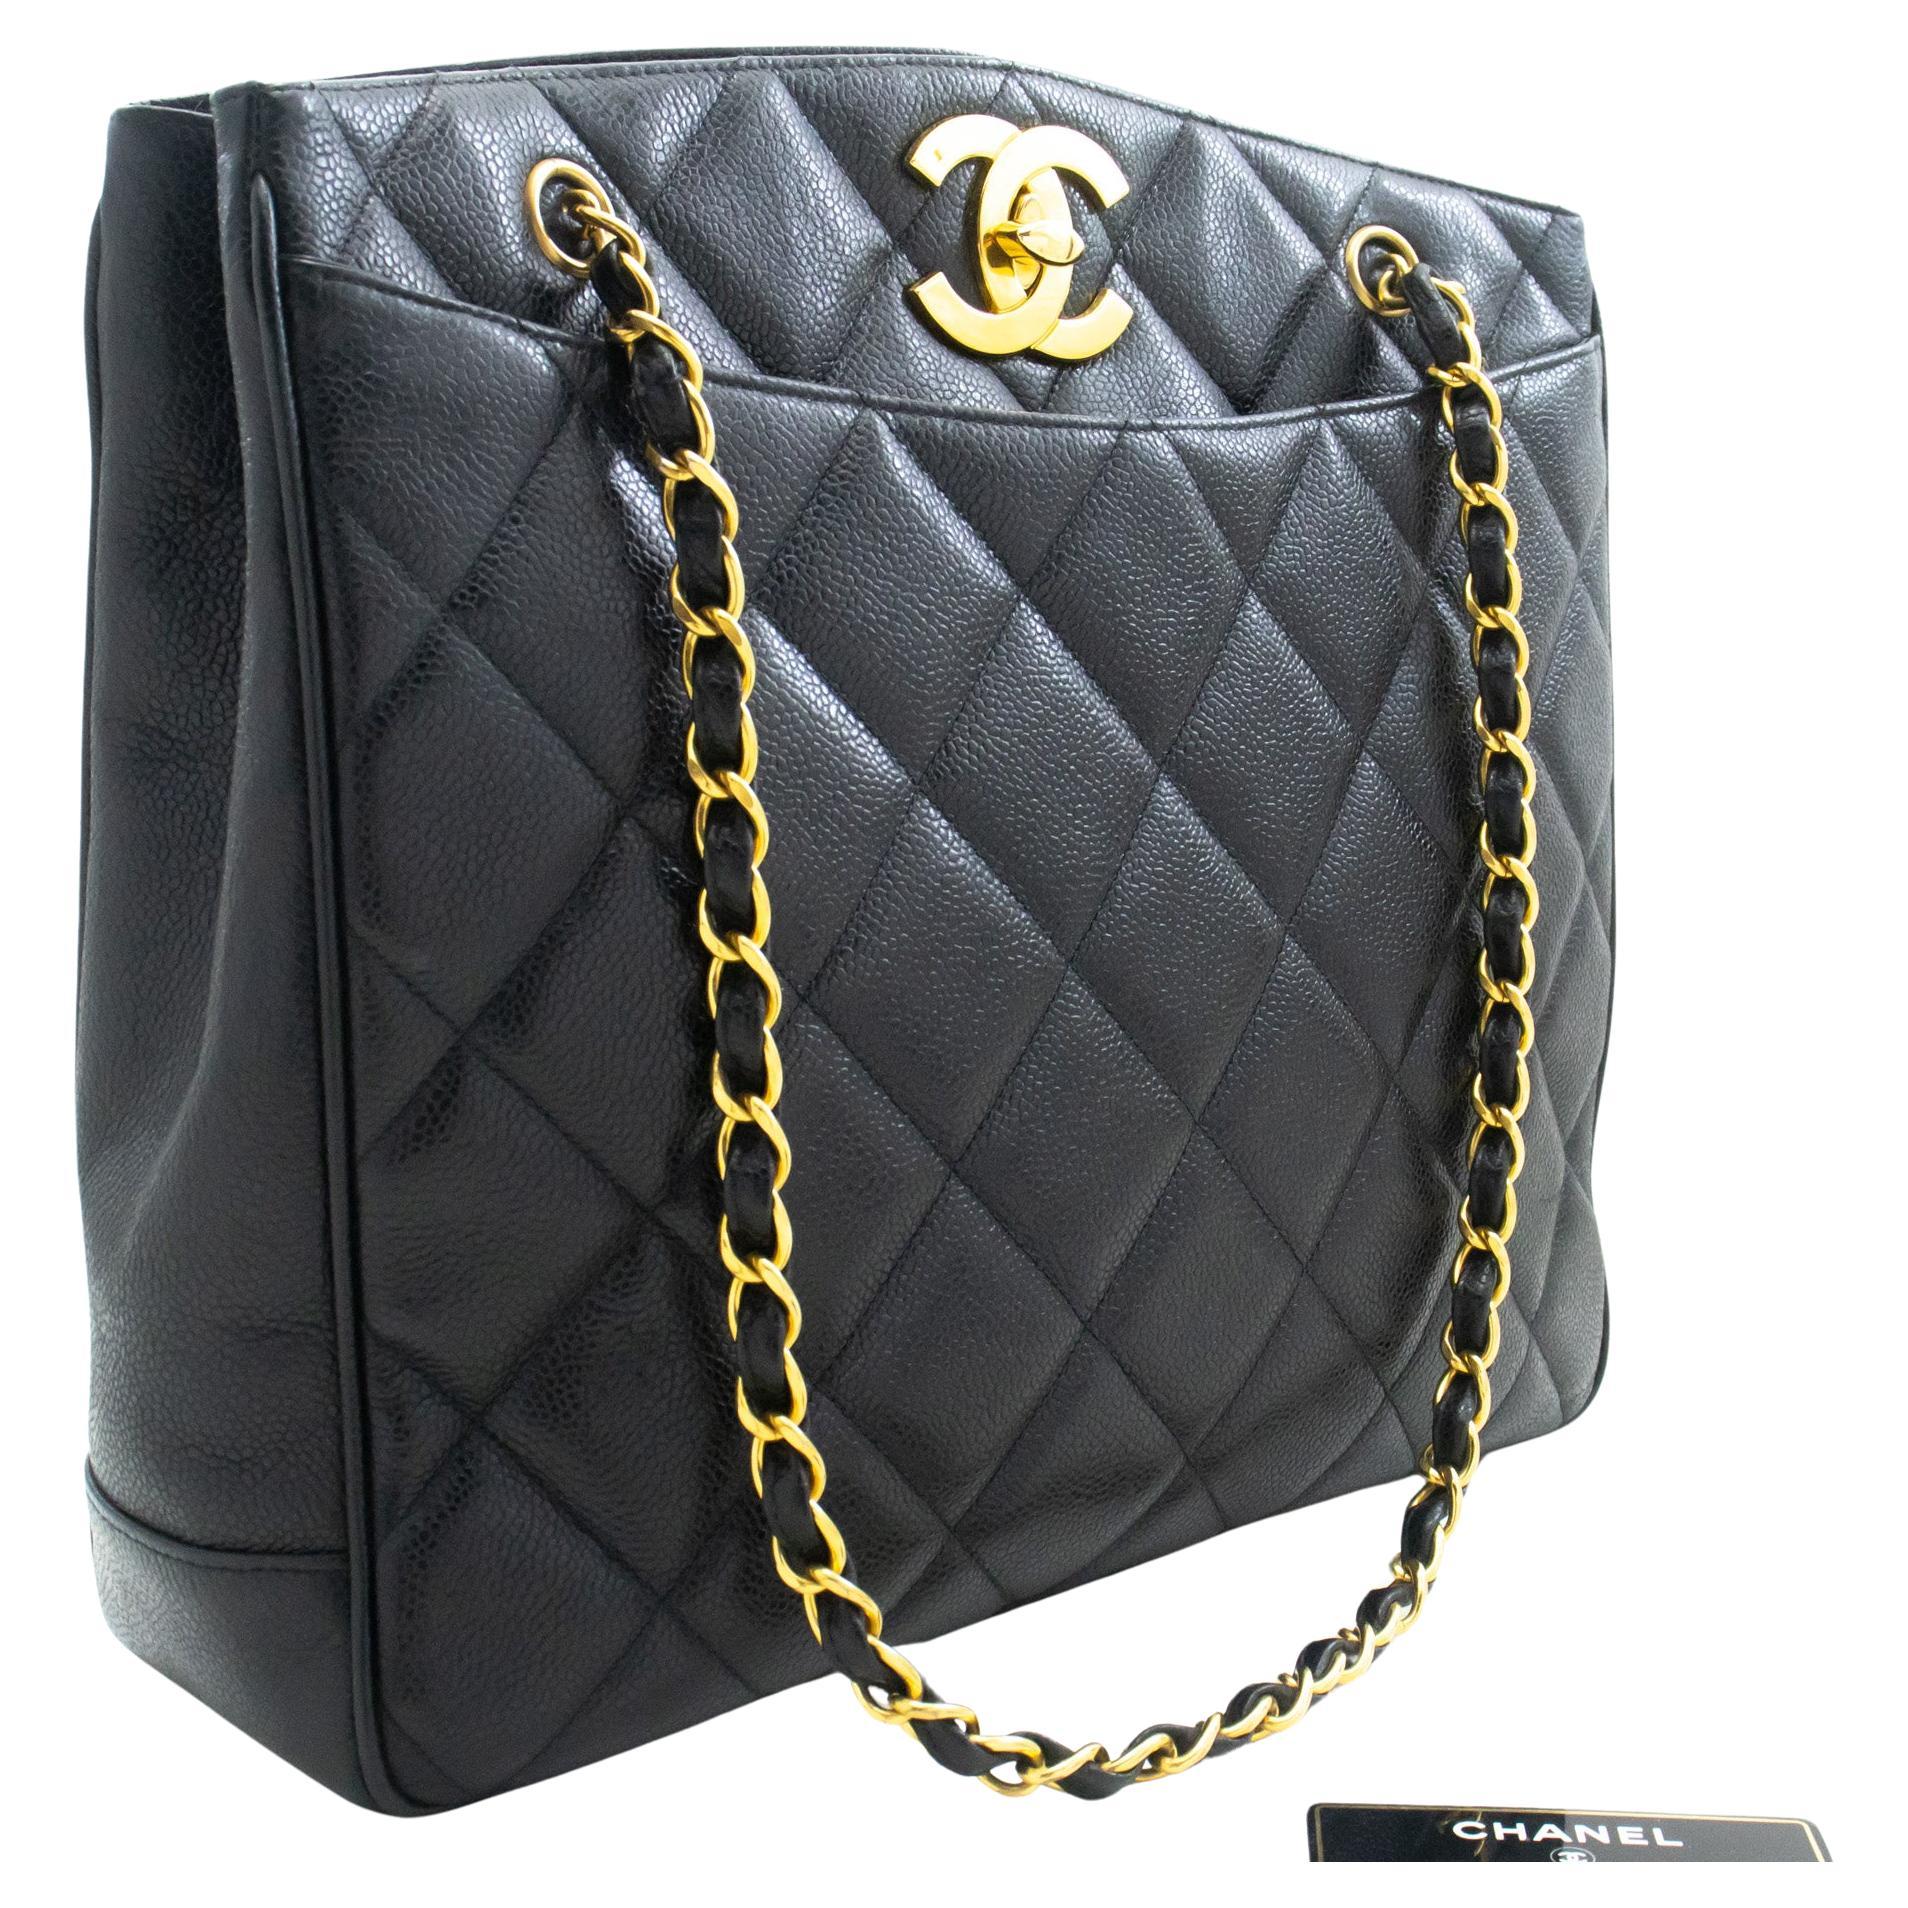 CHANEL Caviar Large Chain Shoulder Bag Black Quilted Leather For Sale